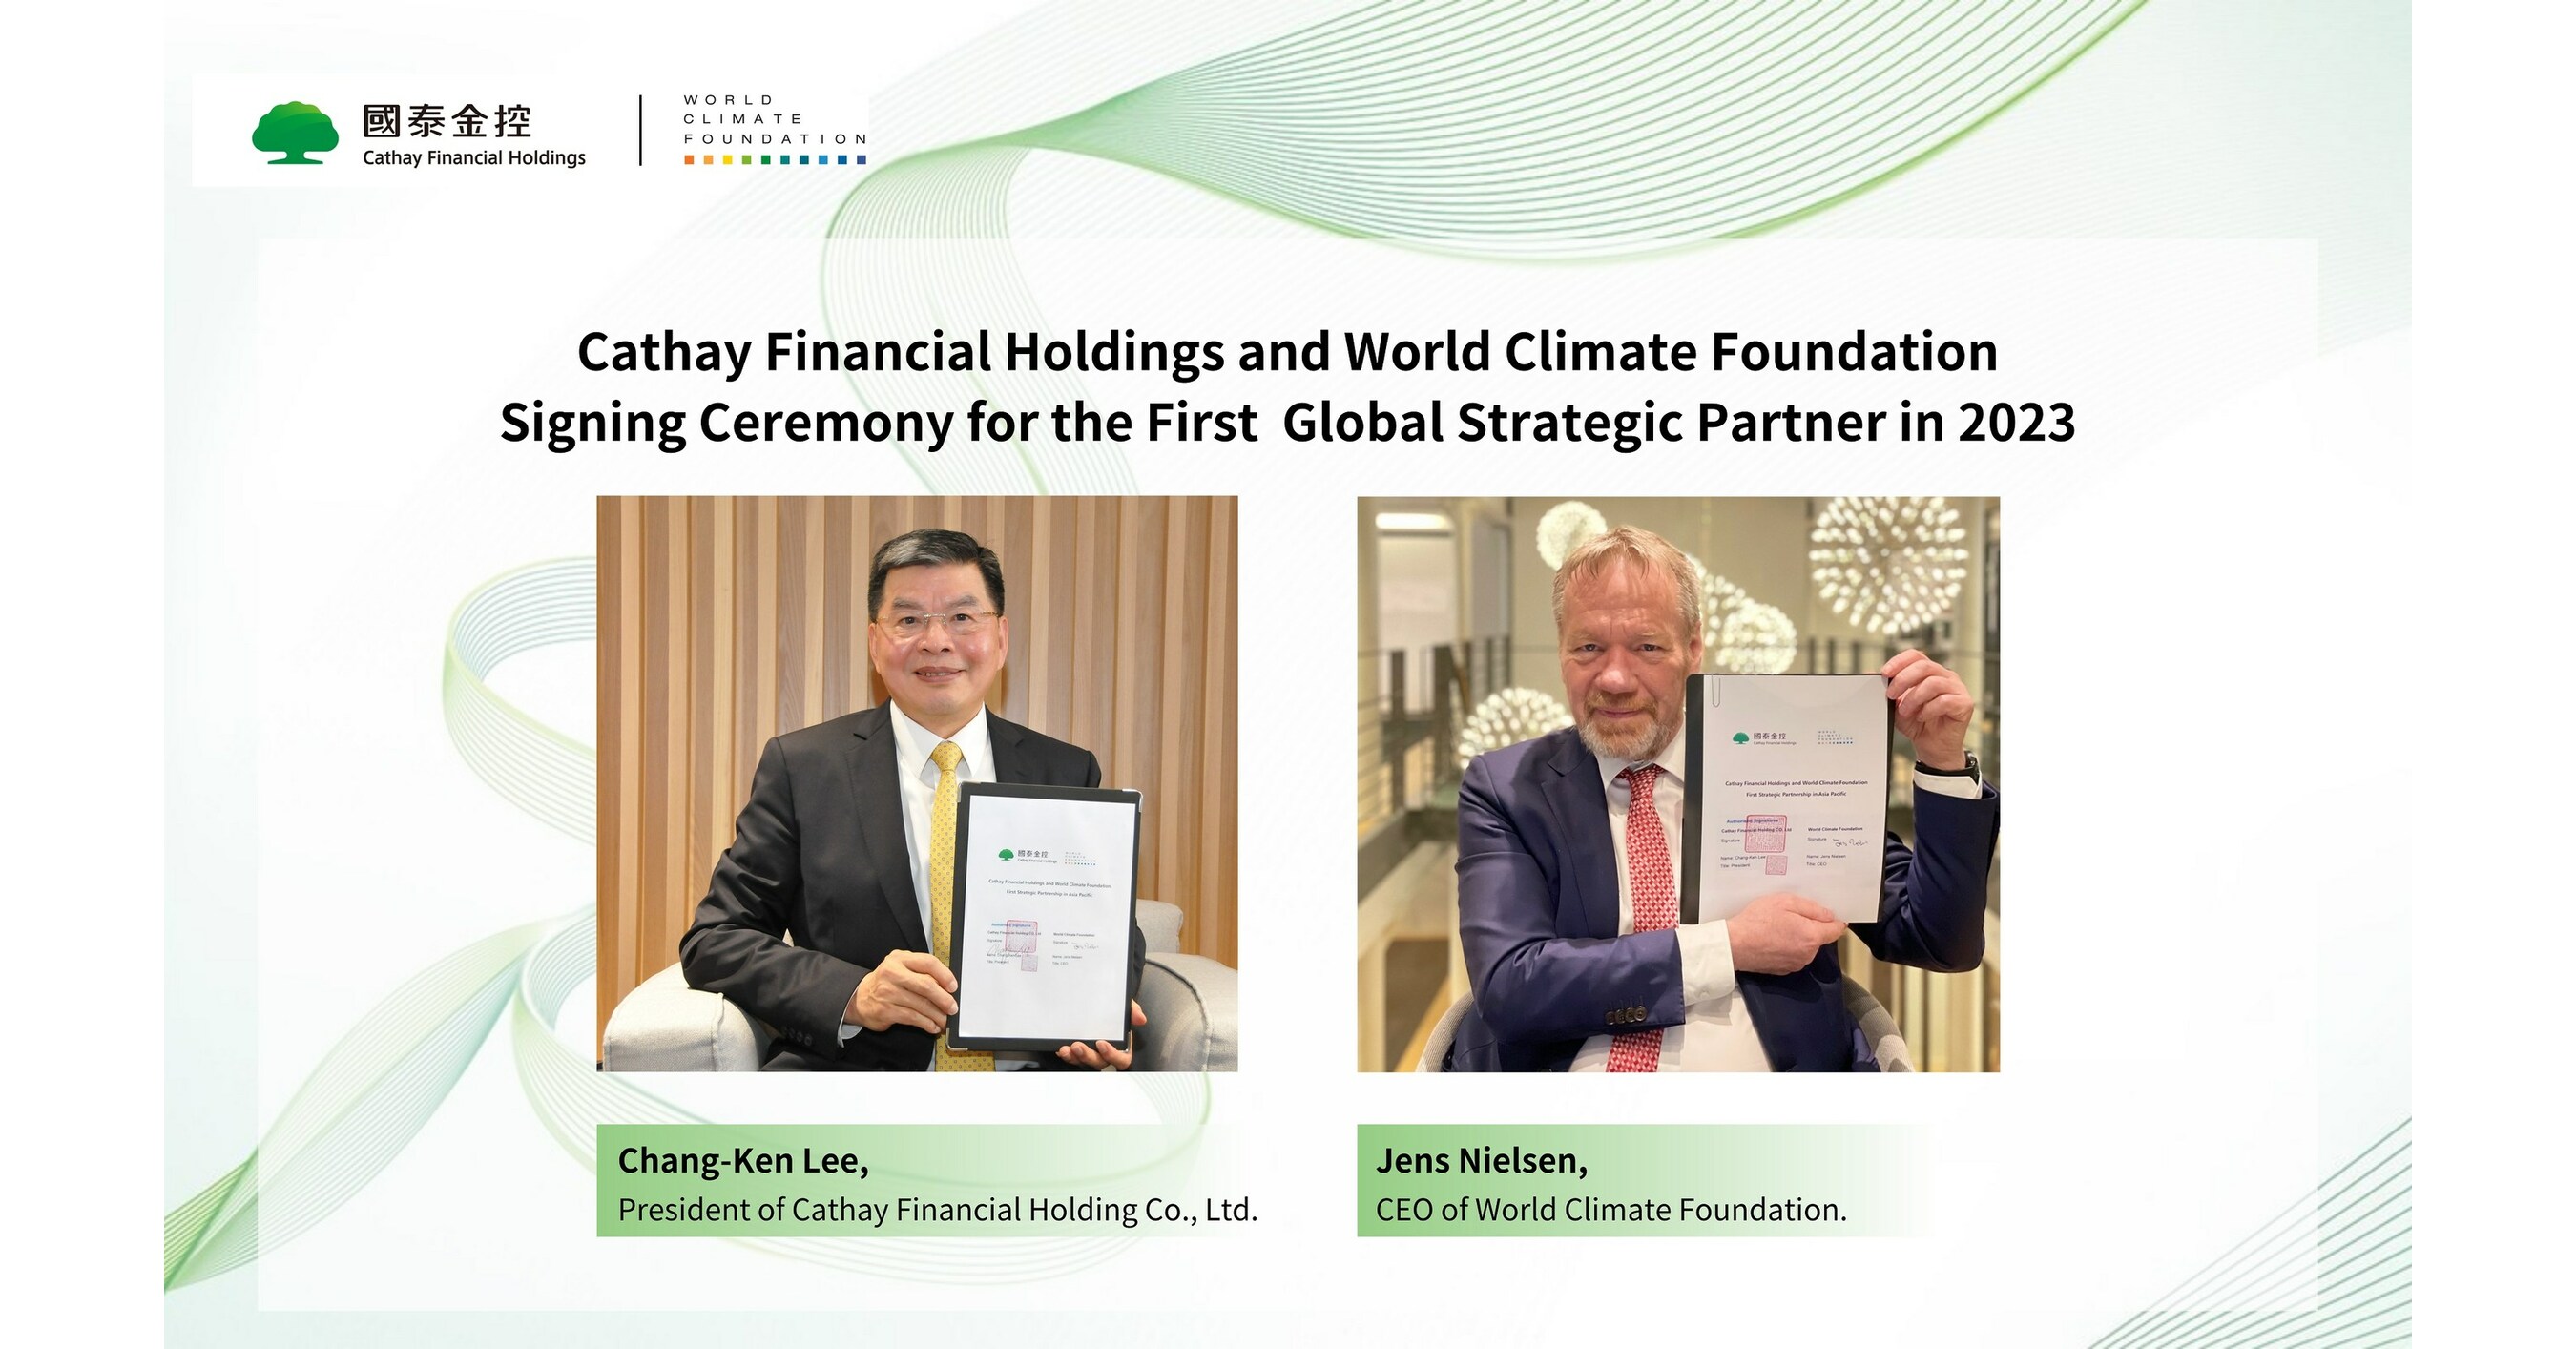 Cathay Financial Holdings, World Climate Foundation’s First Global Strategic Partner in 2023, Aiming to Accelerate Climate Finance Beyond Taiwan